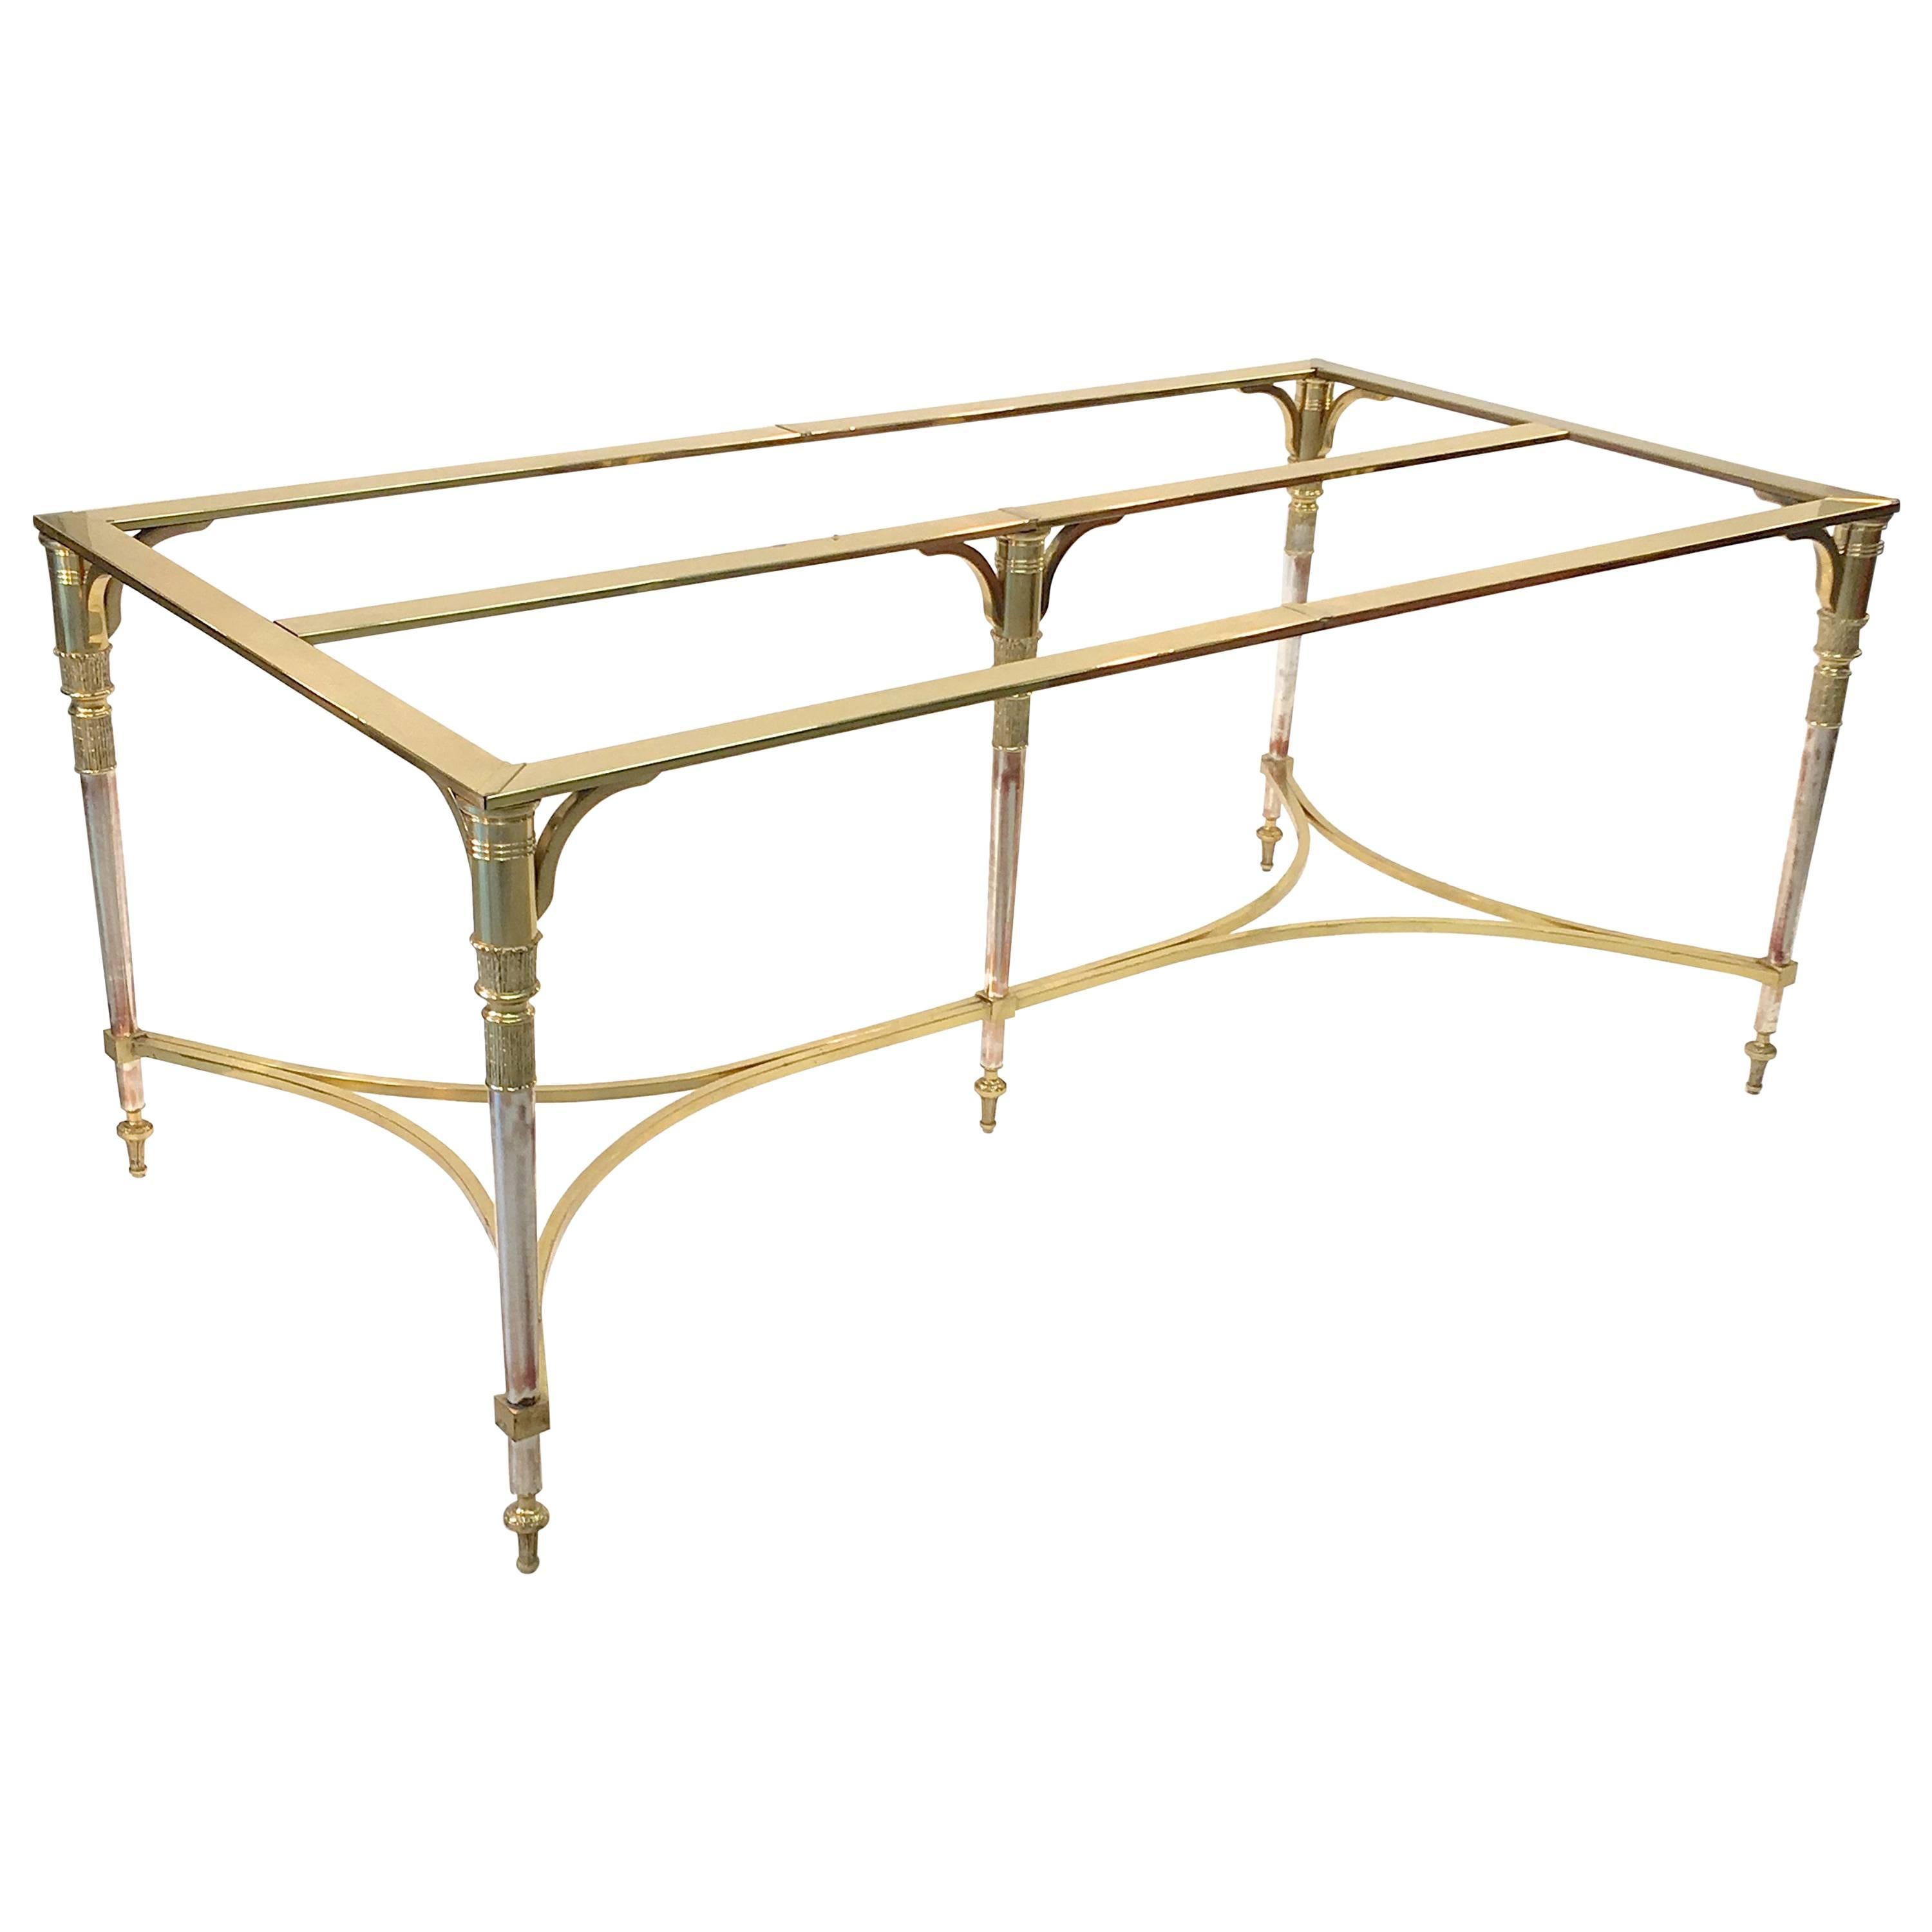 Maison Jansen Style Brass and Polished Steel Dining Table